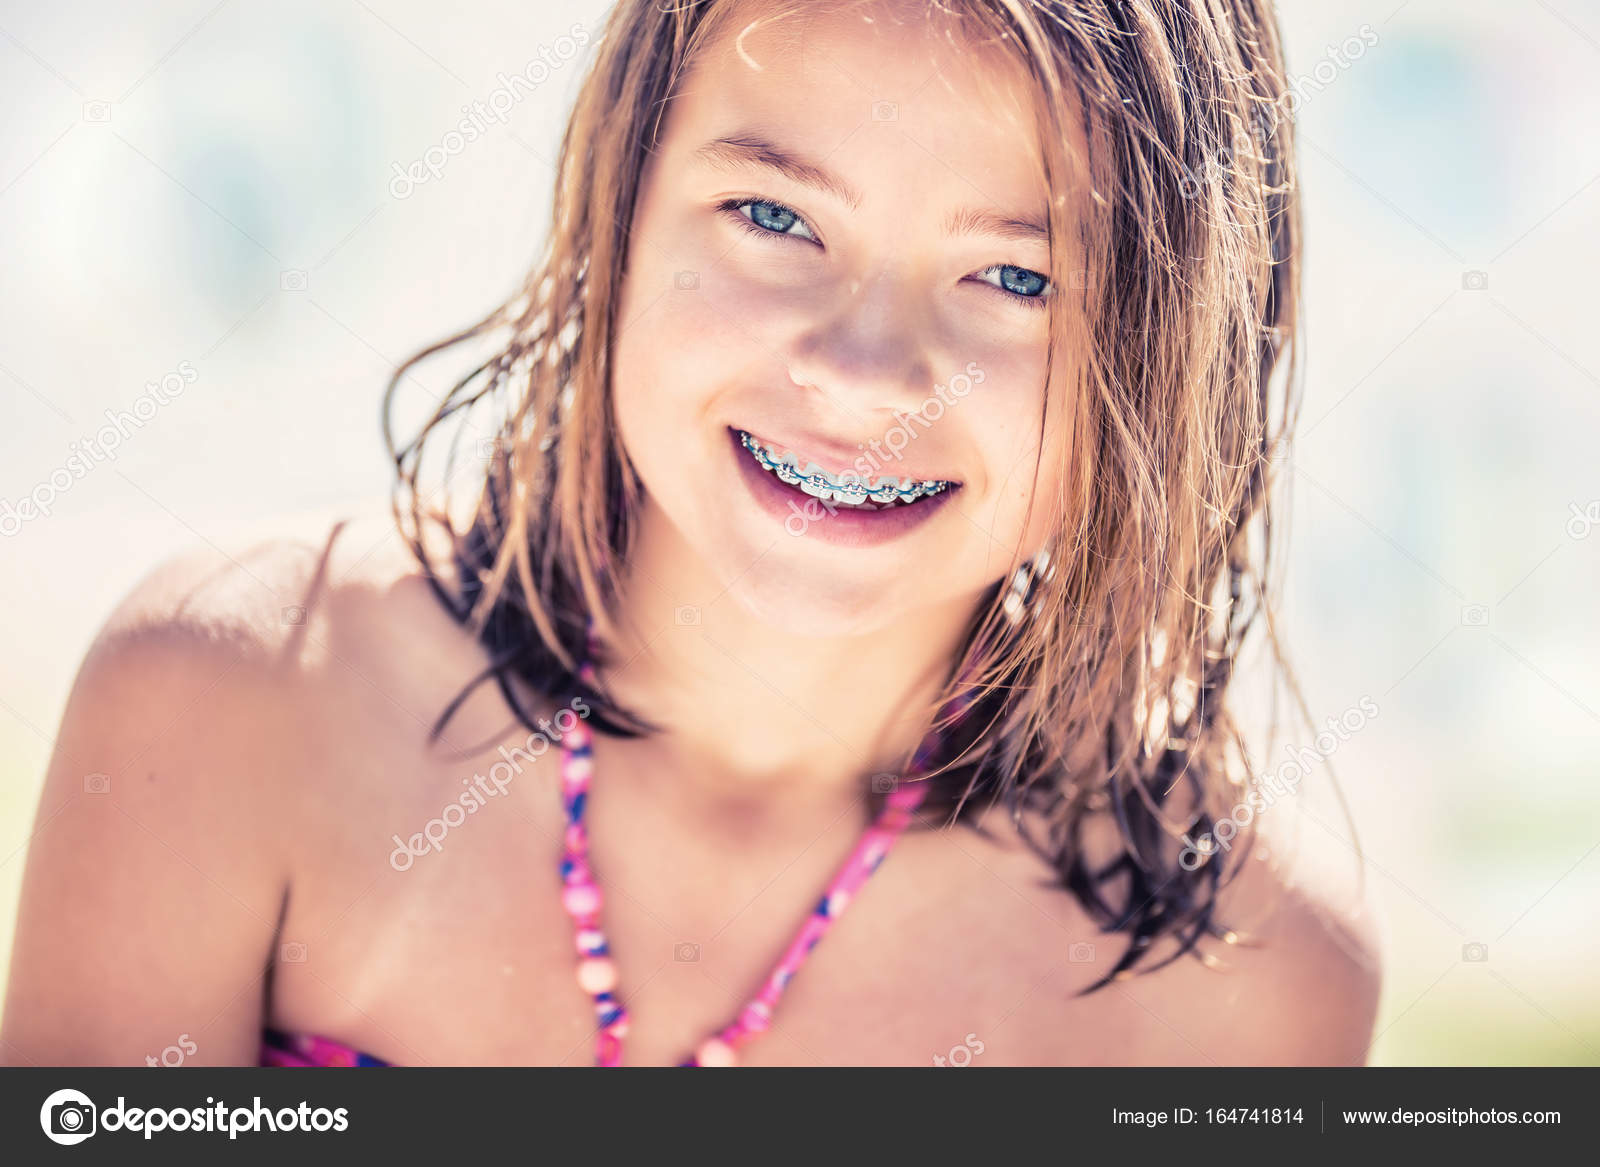 preteen braces Young Teen With Braces Stock Photo - Download Image Now - iStock